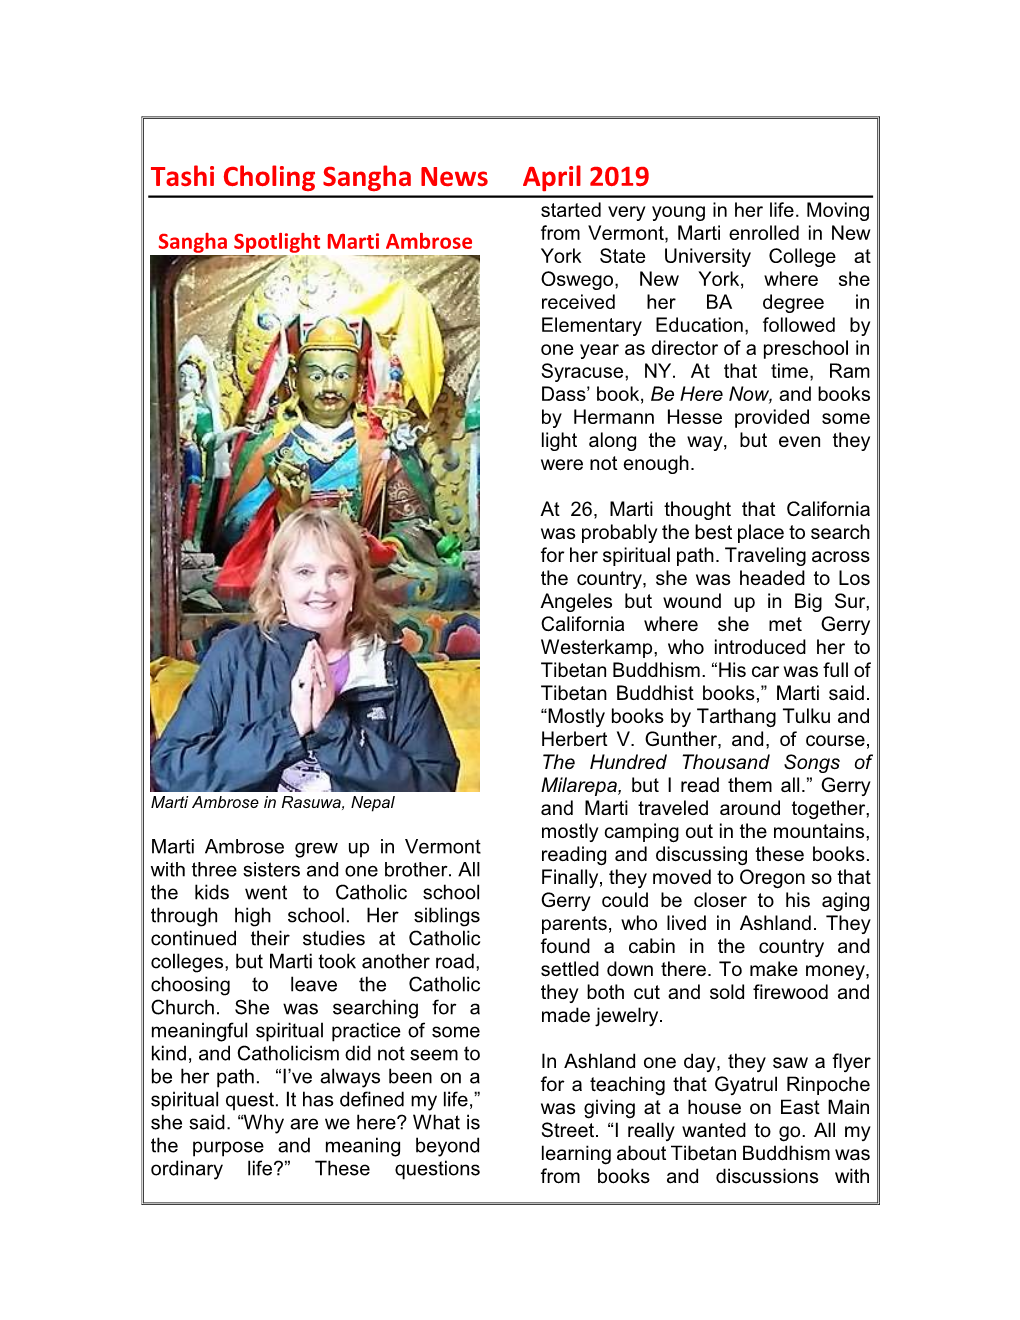 Tashi Choling Sangha News April 2019 Started Very Young in Her Life